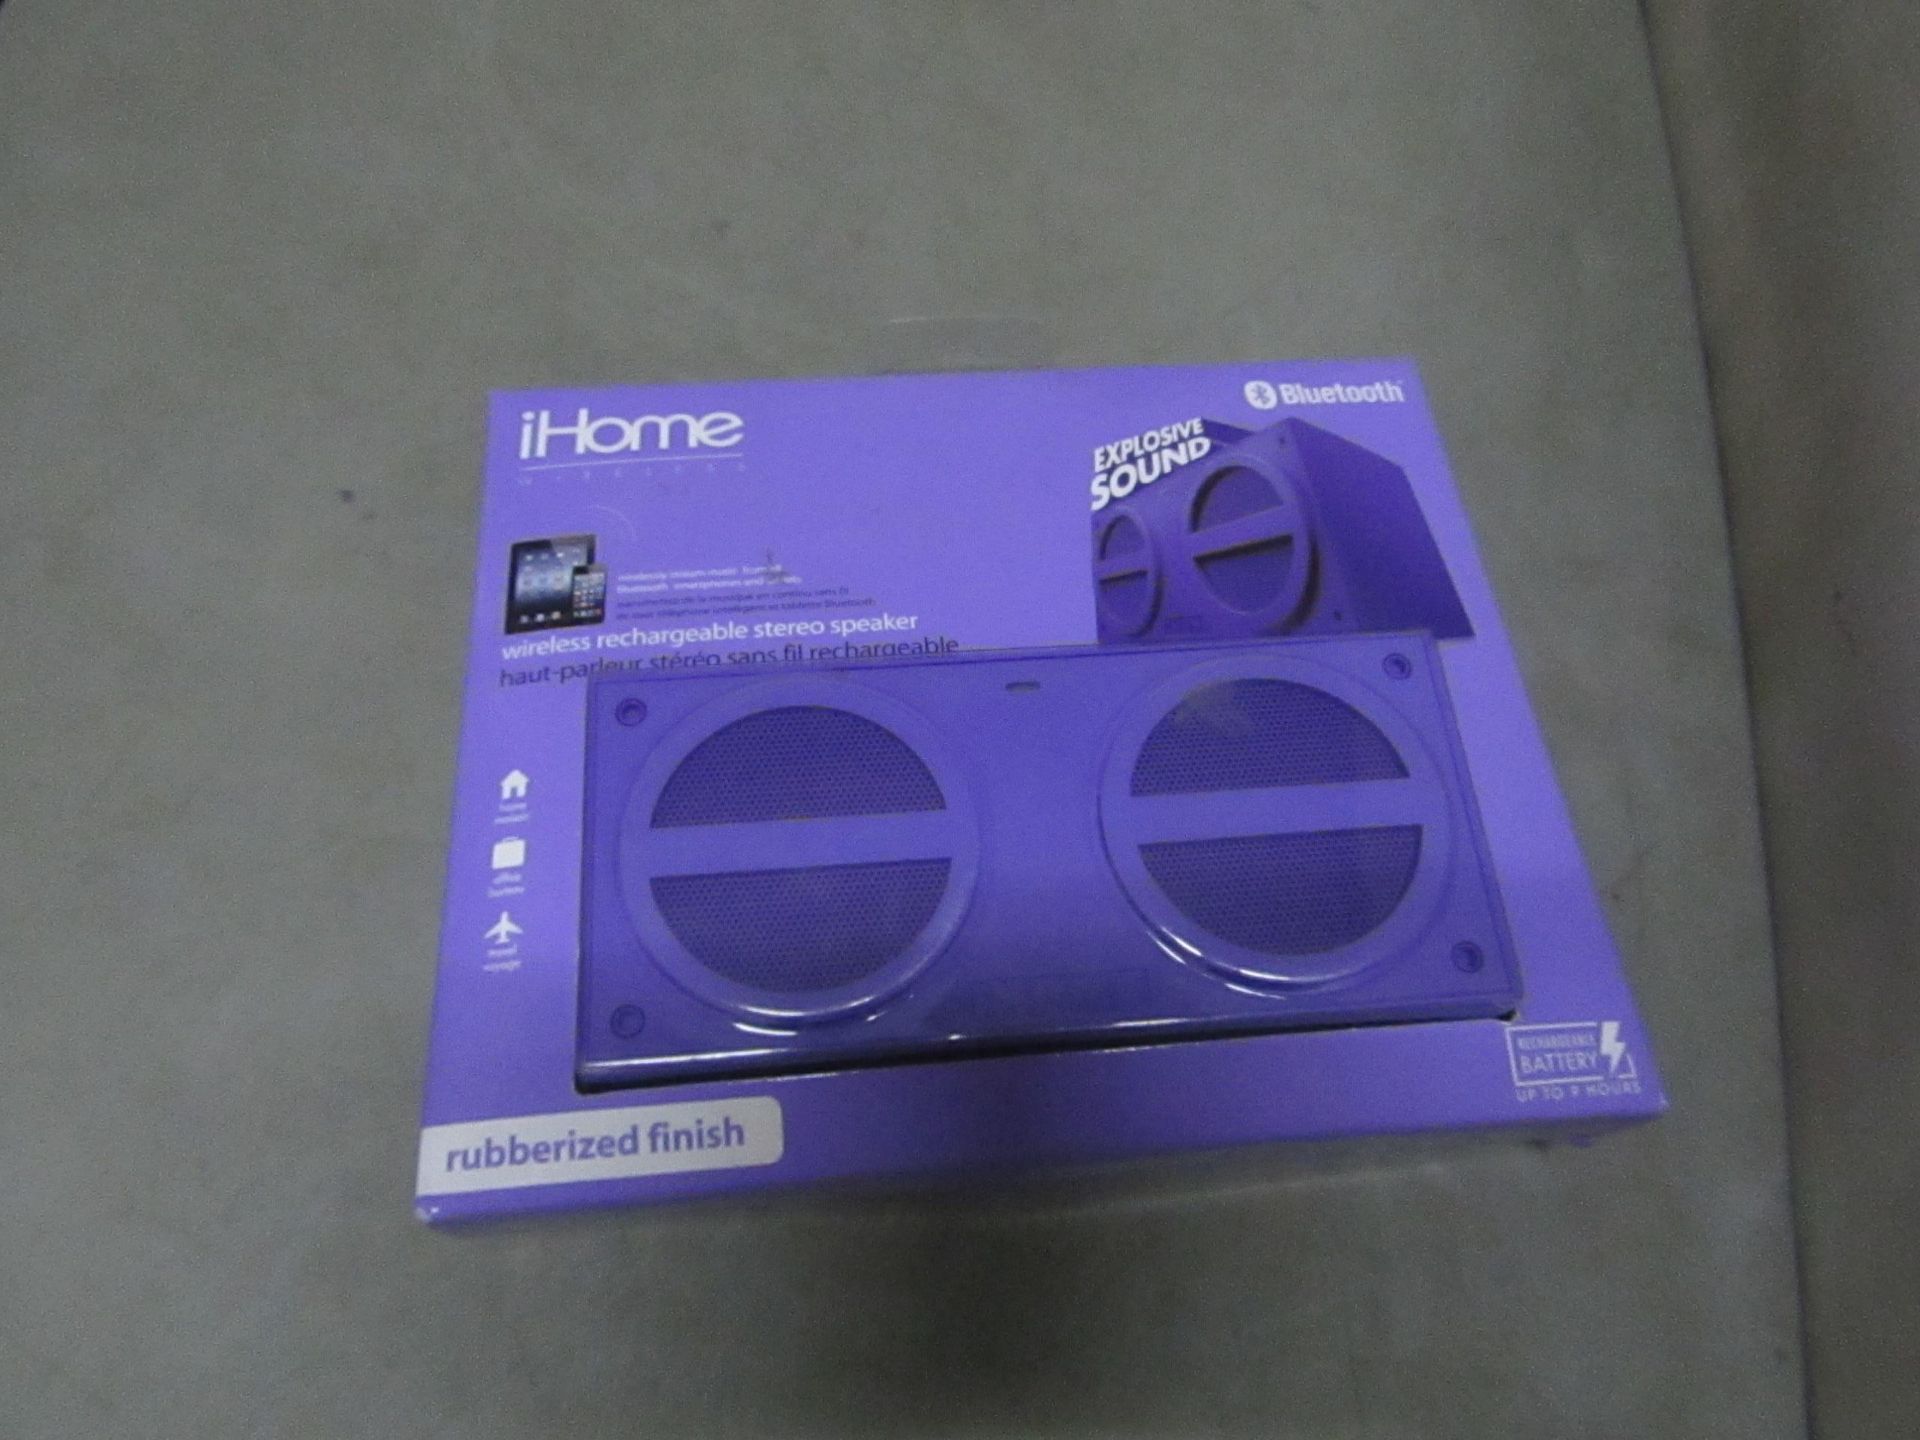 iHome wireless rechargable bluetooth speaker, new and packaged